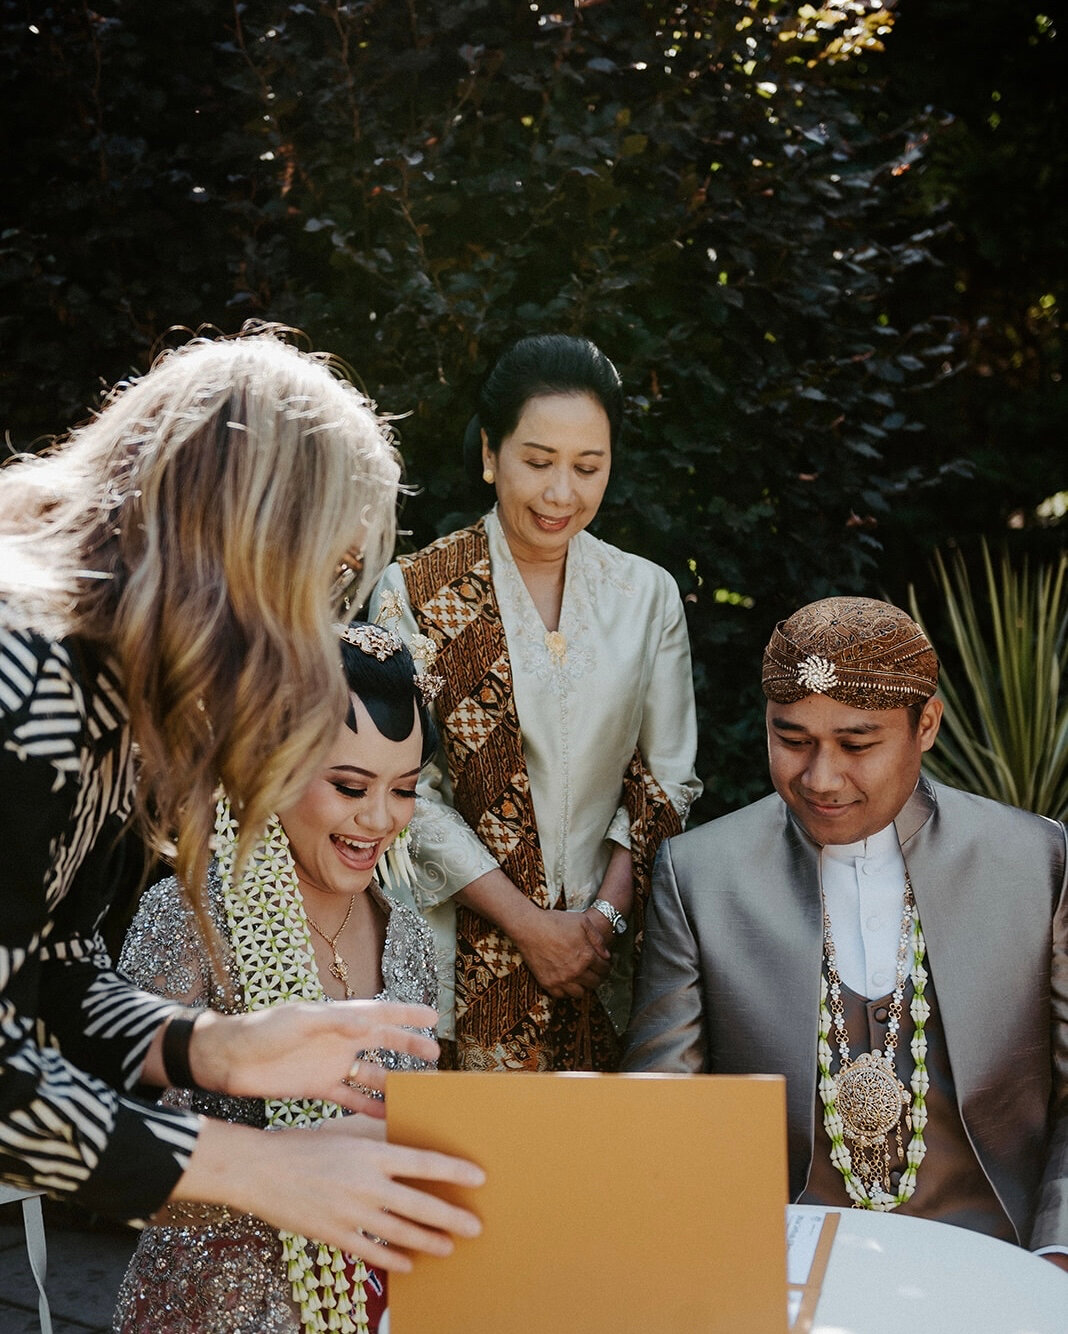 OMG this was stunning. Getting involved in celebrations full of different cultures is fascinating - I am all here for being a part of it! ​​​​​​​​​Photo by @ellapalijphoto
@beechmont.retreat
.
.
.
.
.
#balinesewedding #indonesianwedding #beechmontret